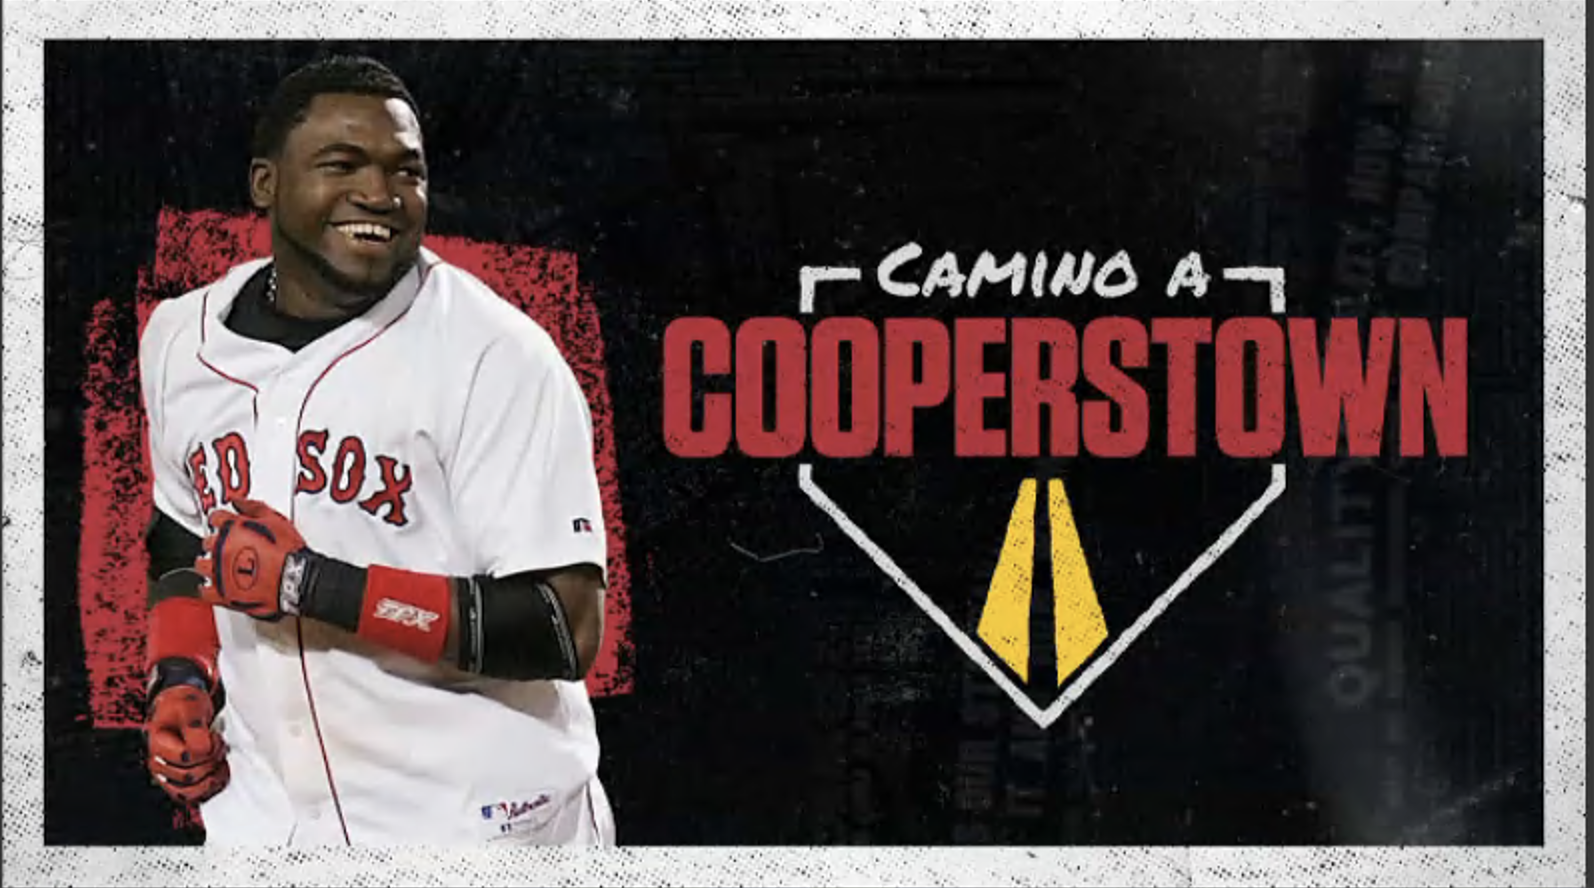 David Ortiz Hall of Fame induction weekend is a reminder of Red